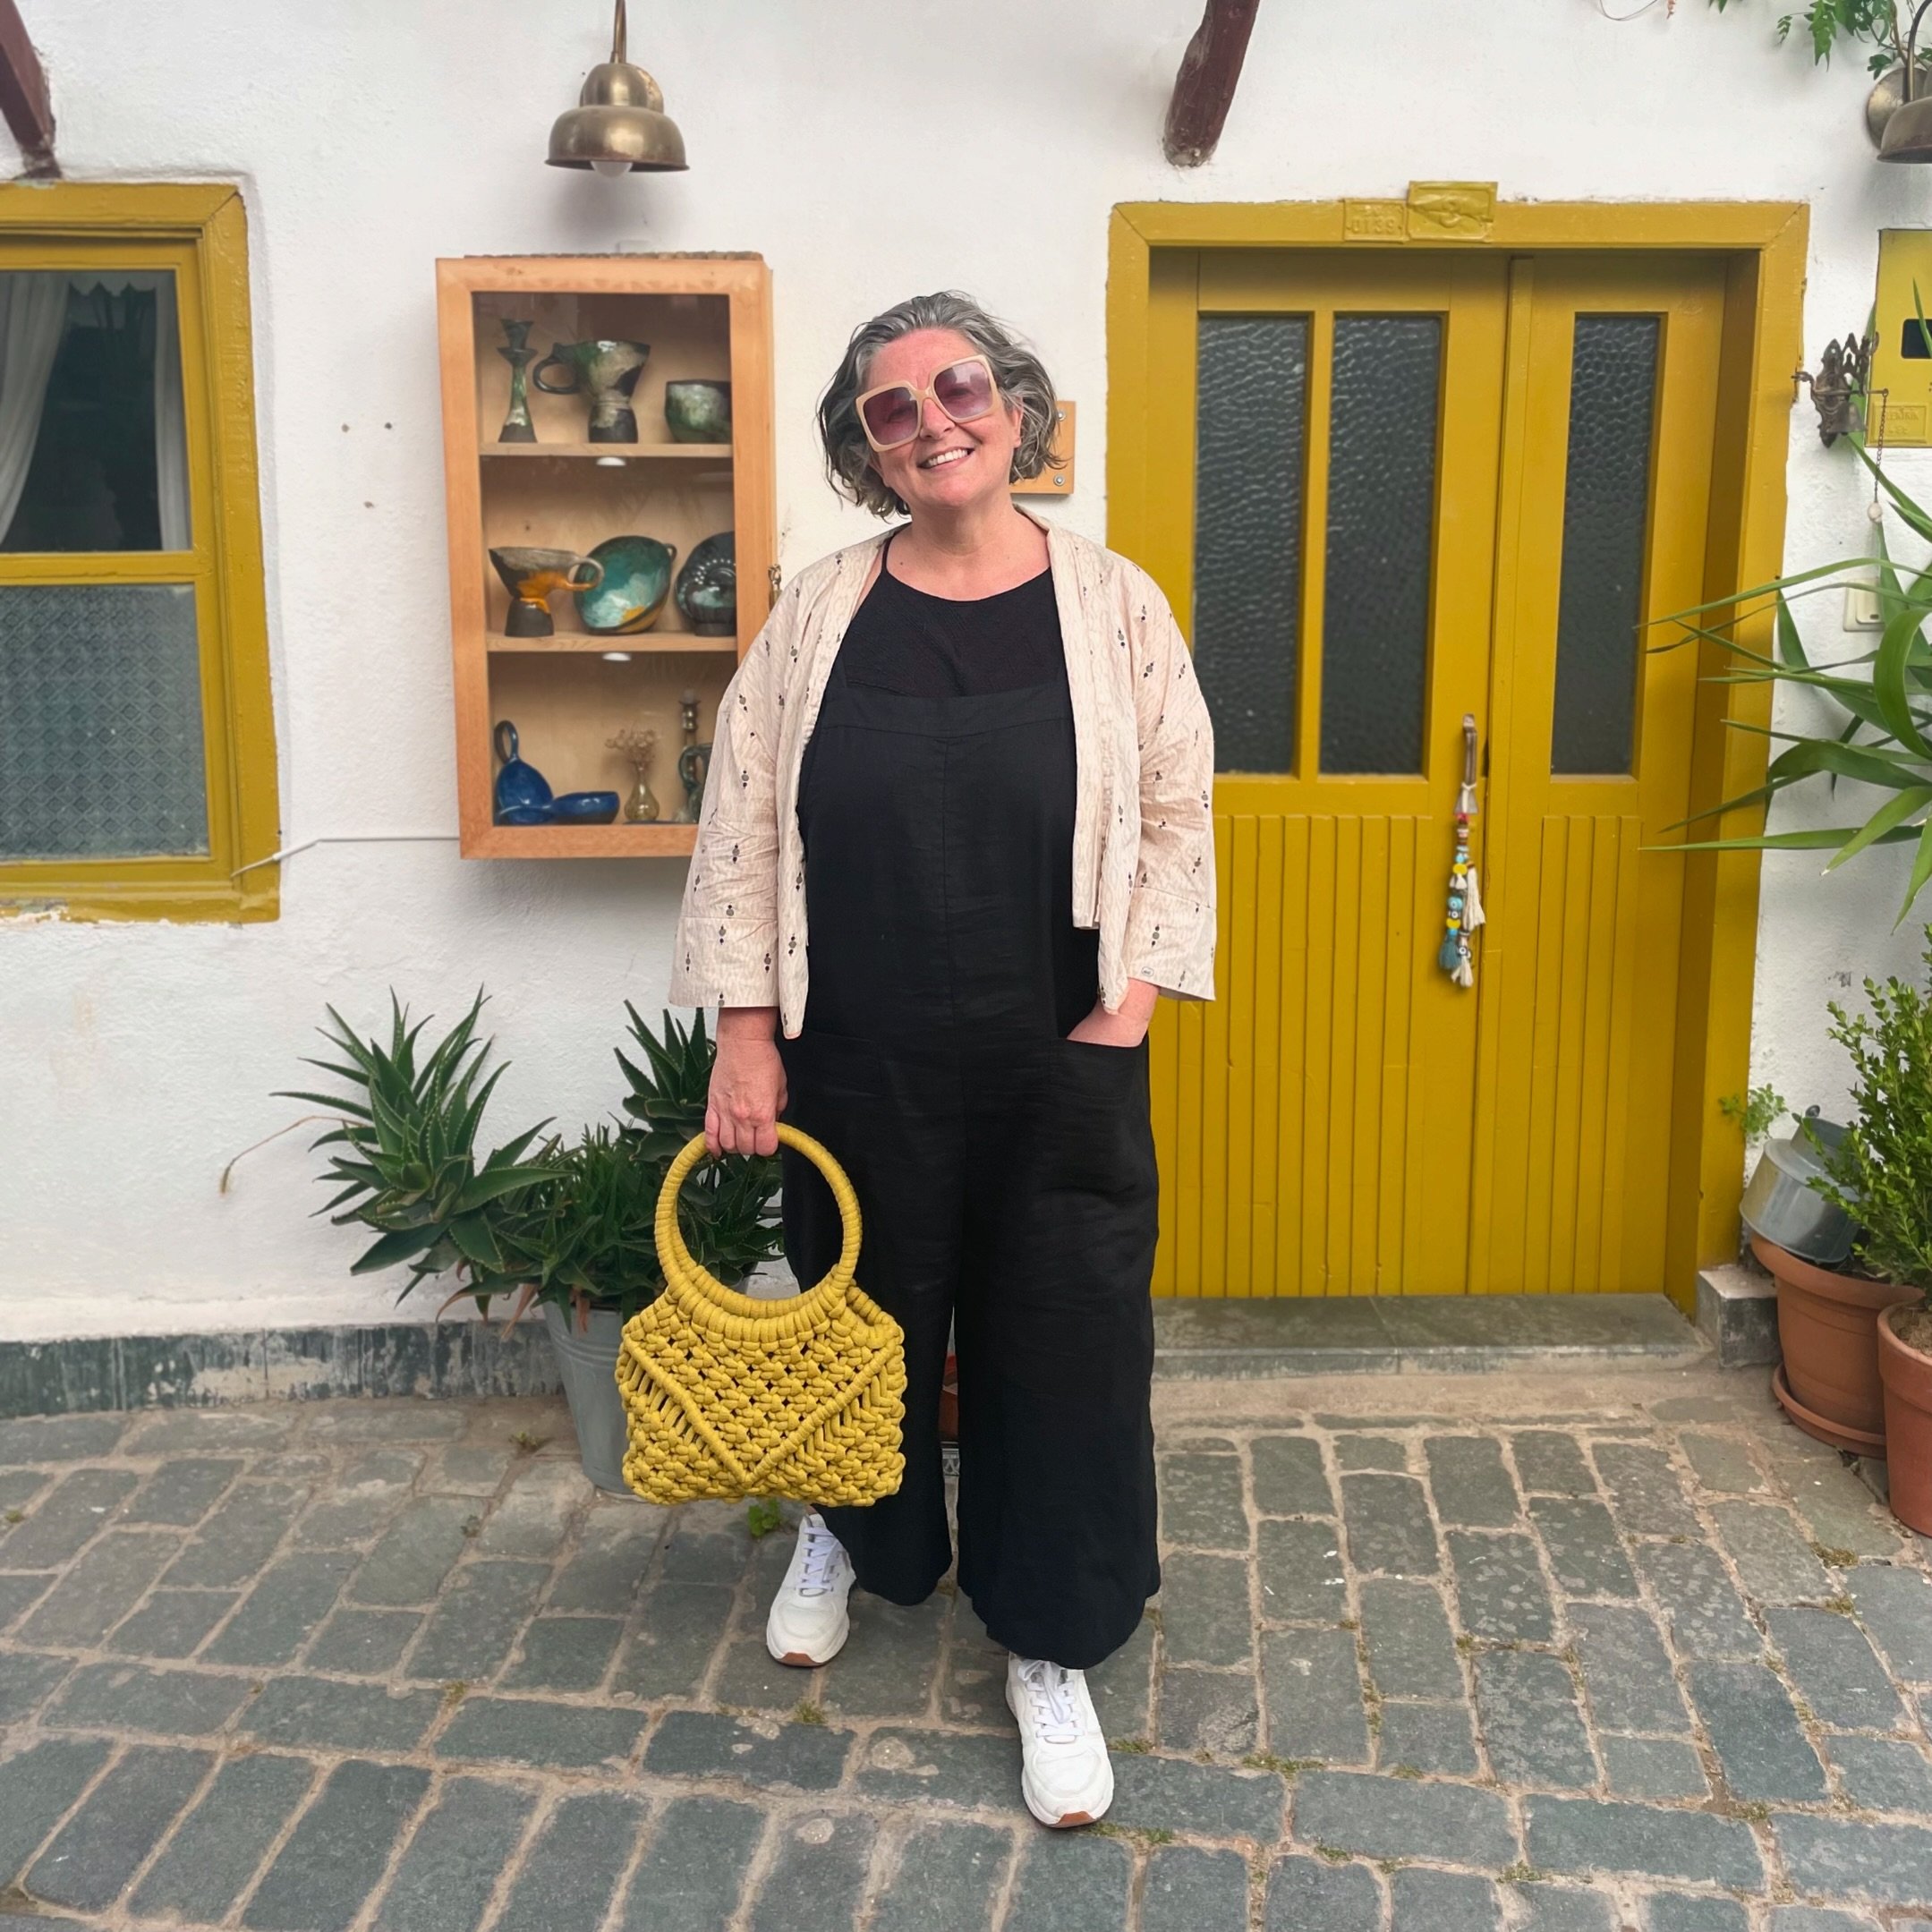 &lsquo;CHITA&rsquo; bag, seen here in French Mustard, blending in perfectly with her surroundings in the beautiful Turkish town of Kaş. 

We are currently putting some dates together for  Macram&eacute; workshops to learn the skills to make your own 